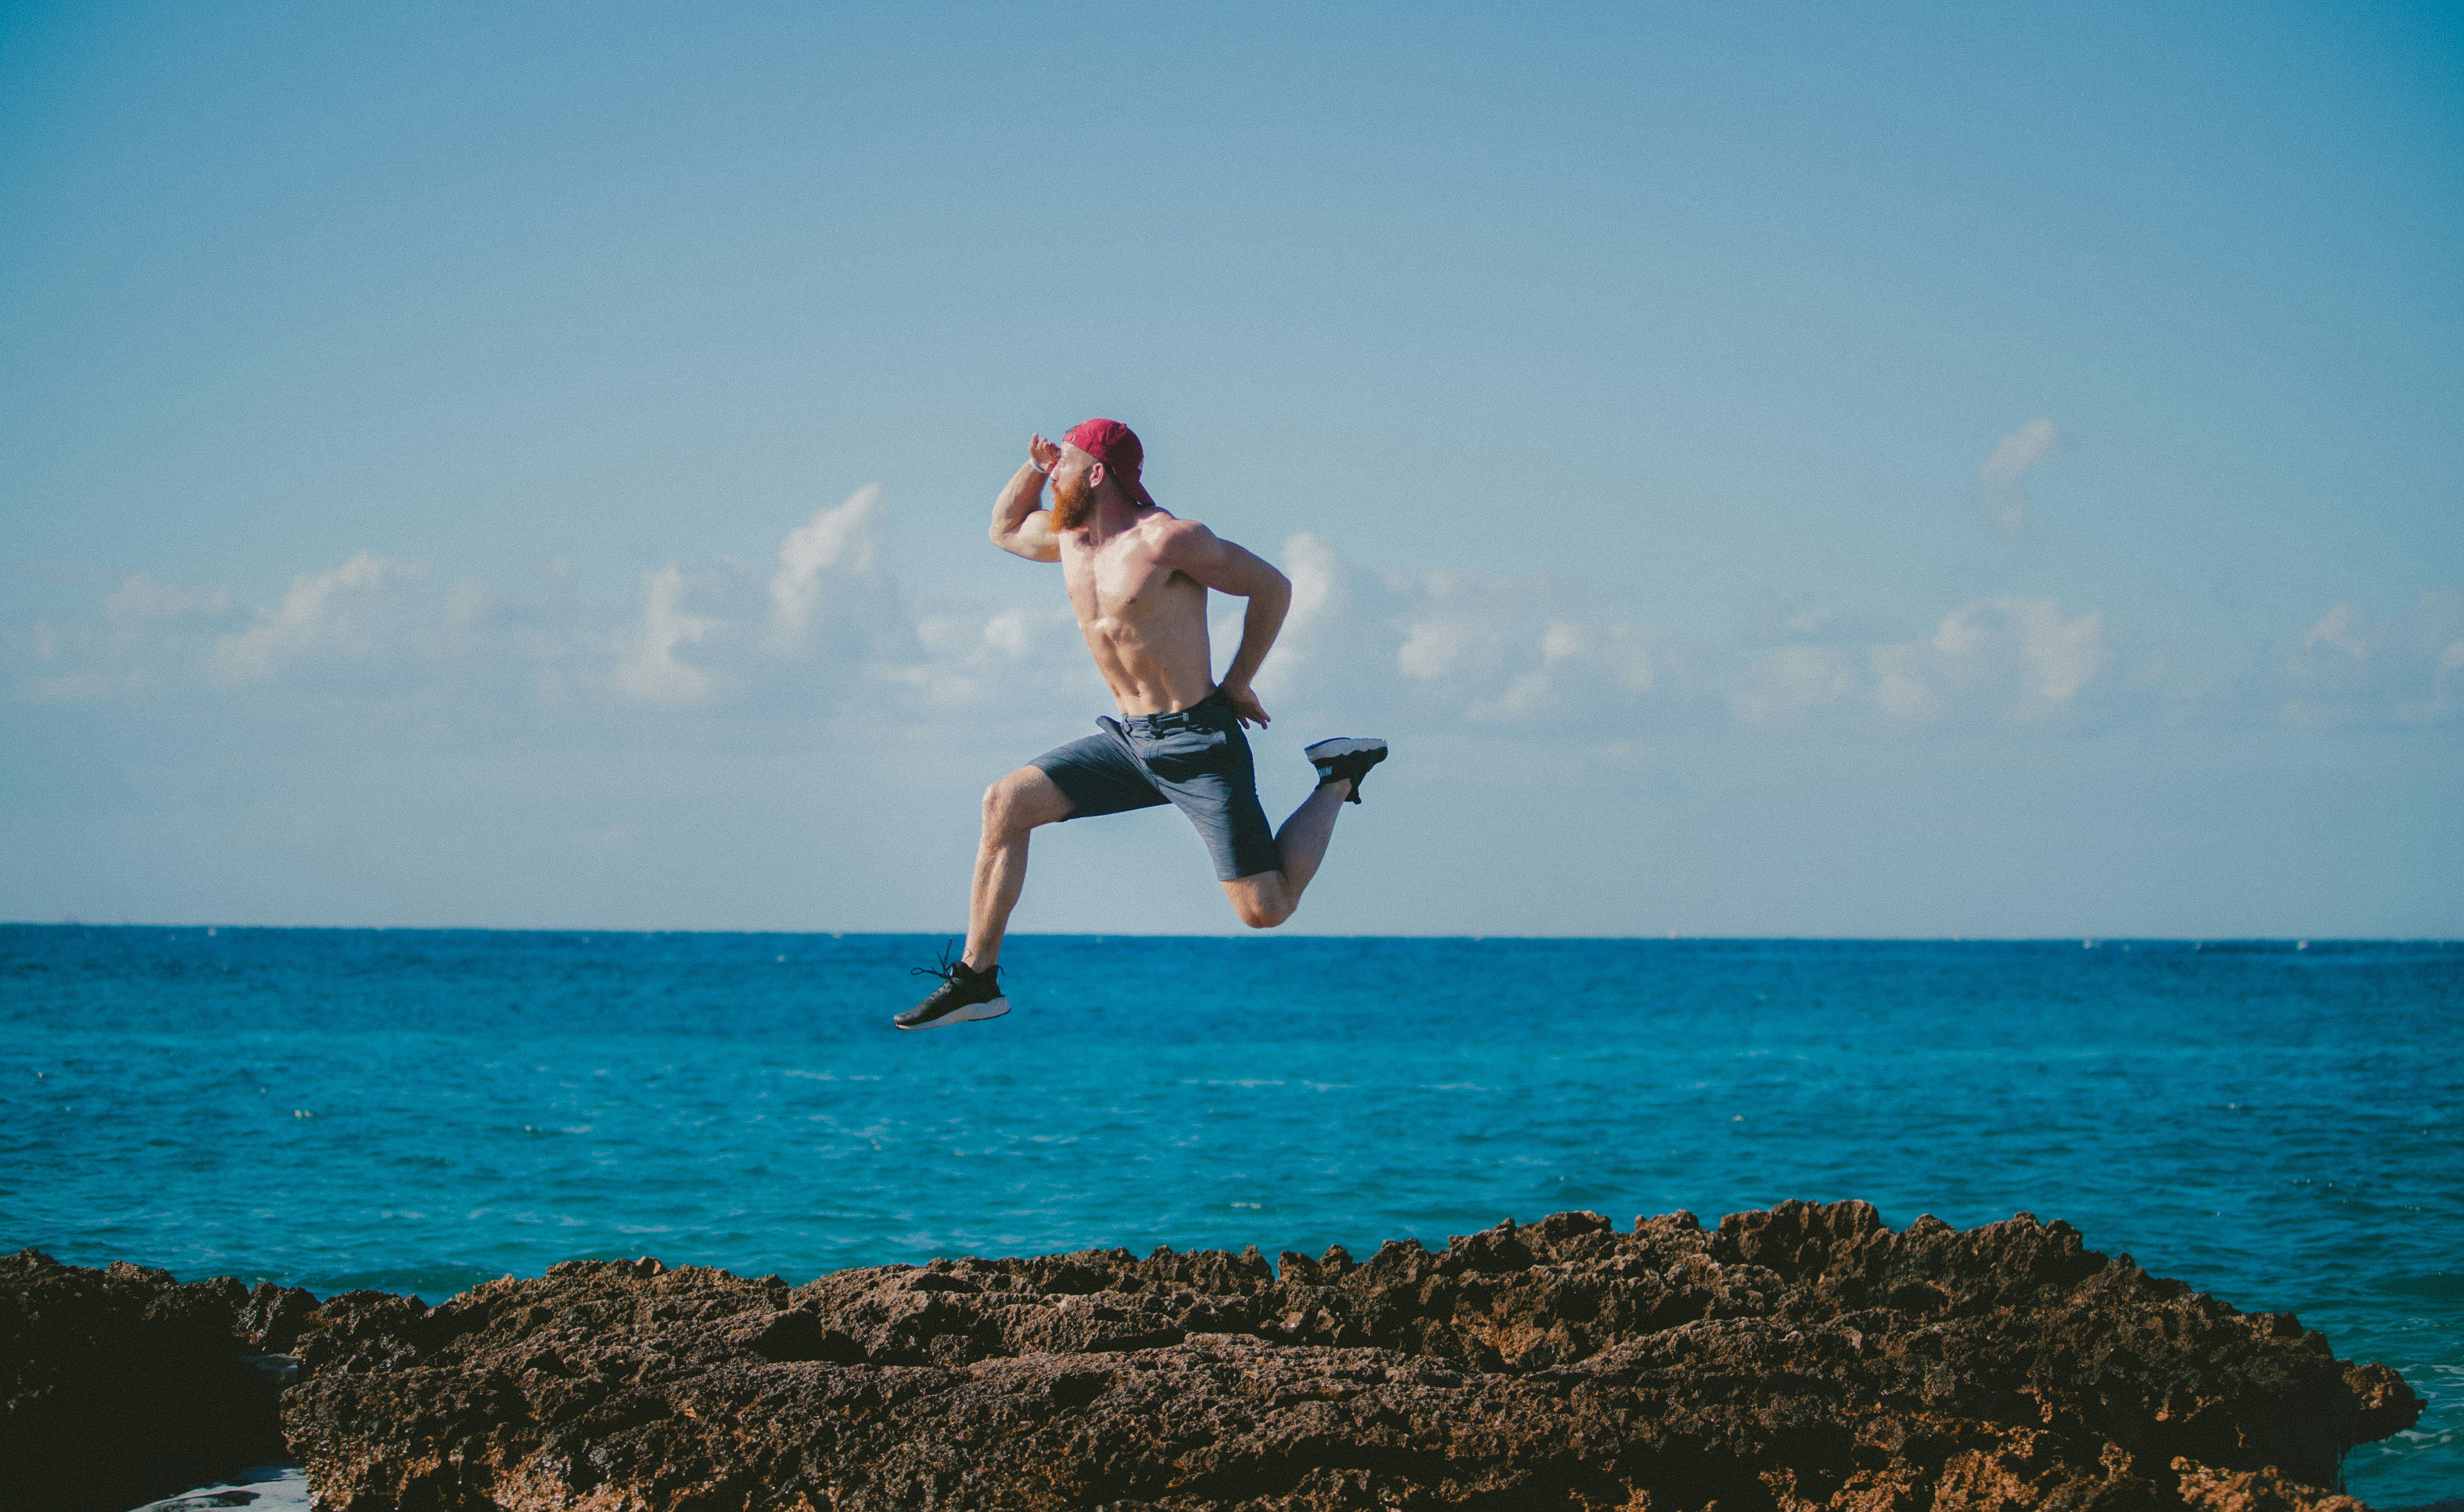 man jumping in mid air while looking ahead beside body of water during daytime